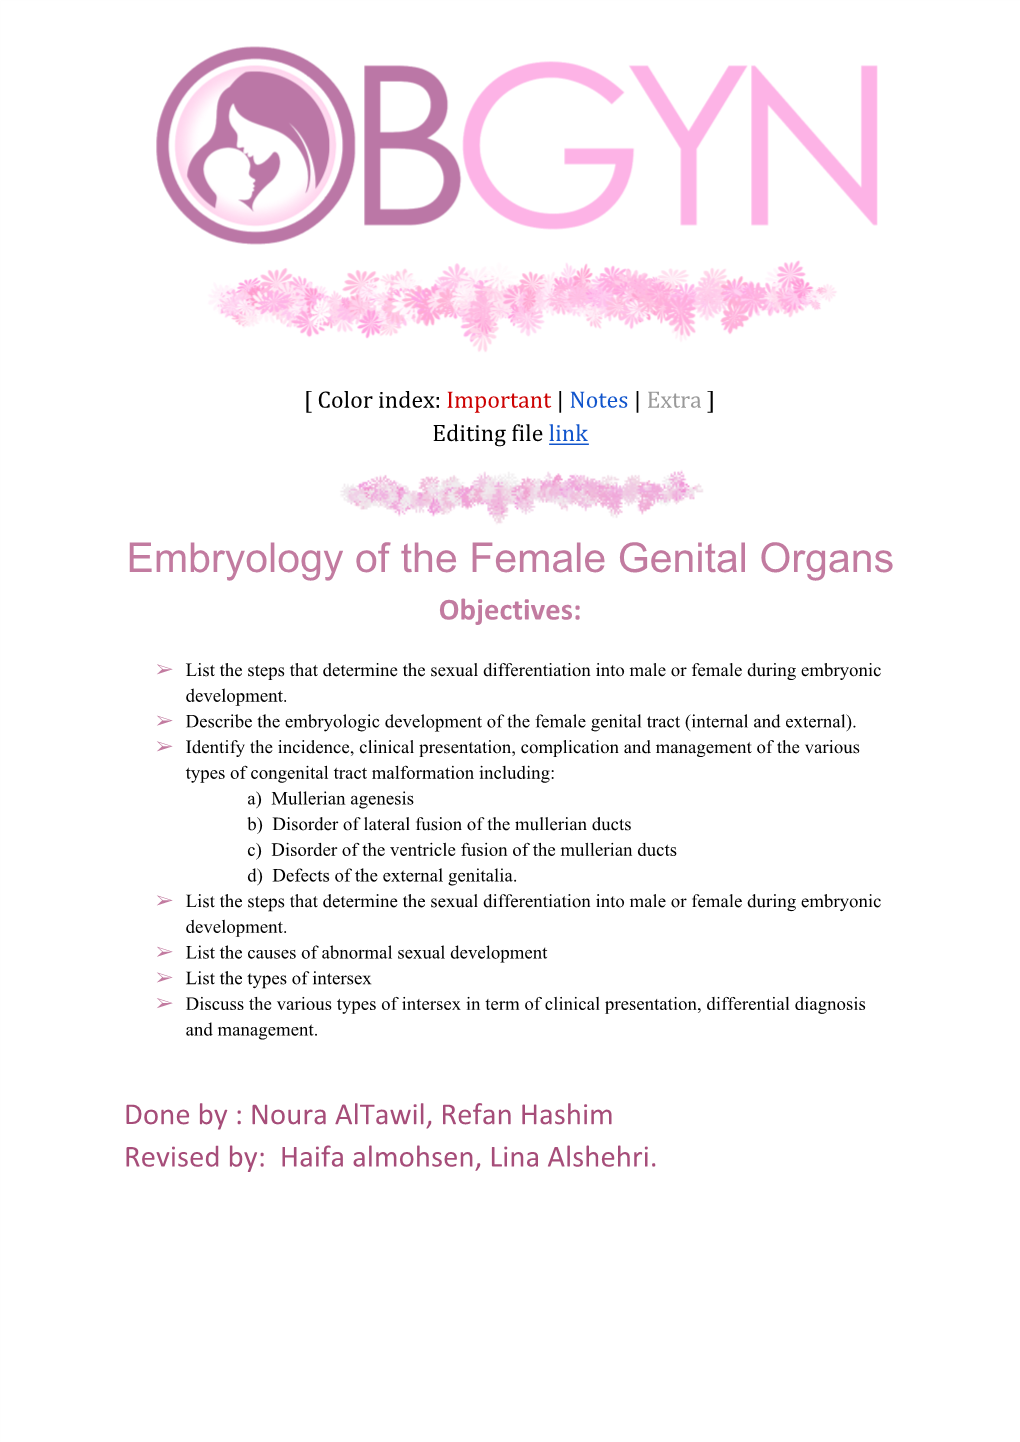 Embryology of the Female Genital Organs Objectives